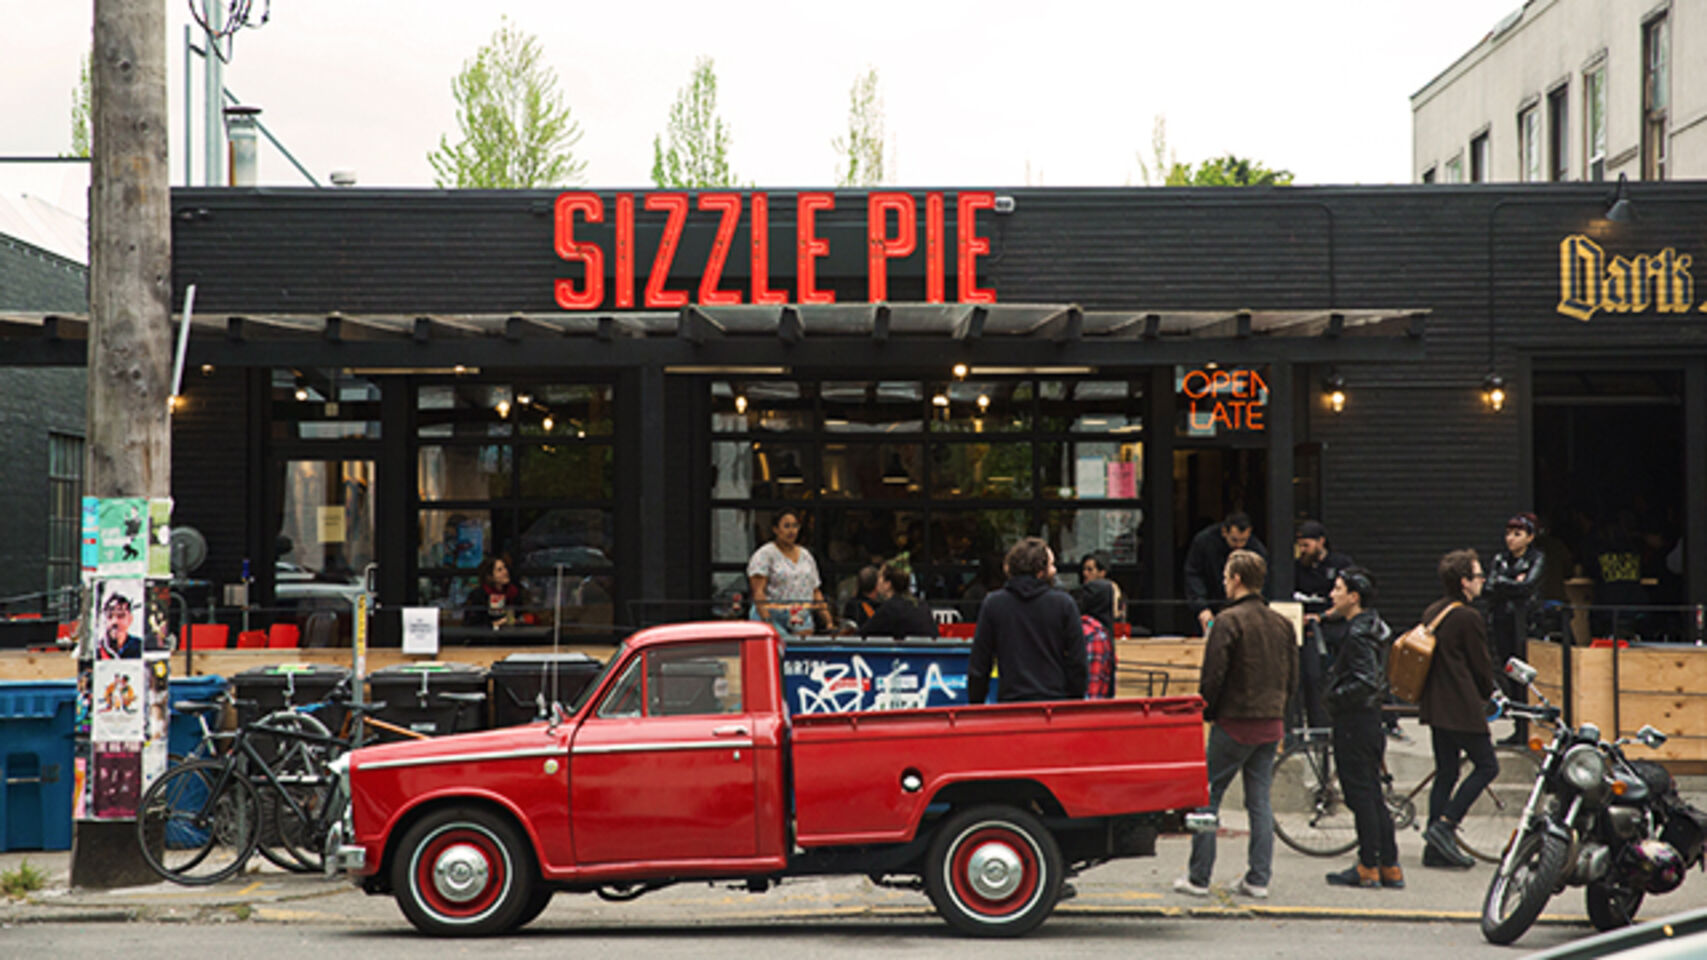 A photo of Sizzle Pie